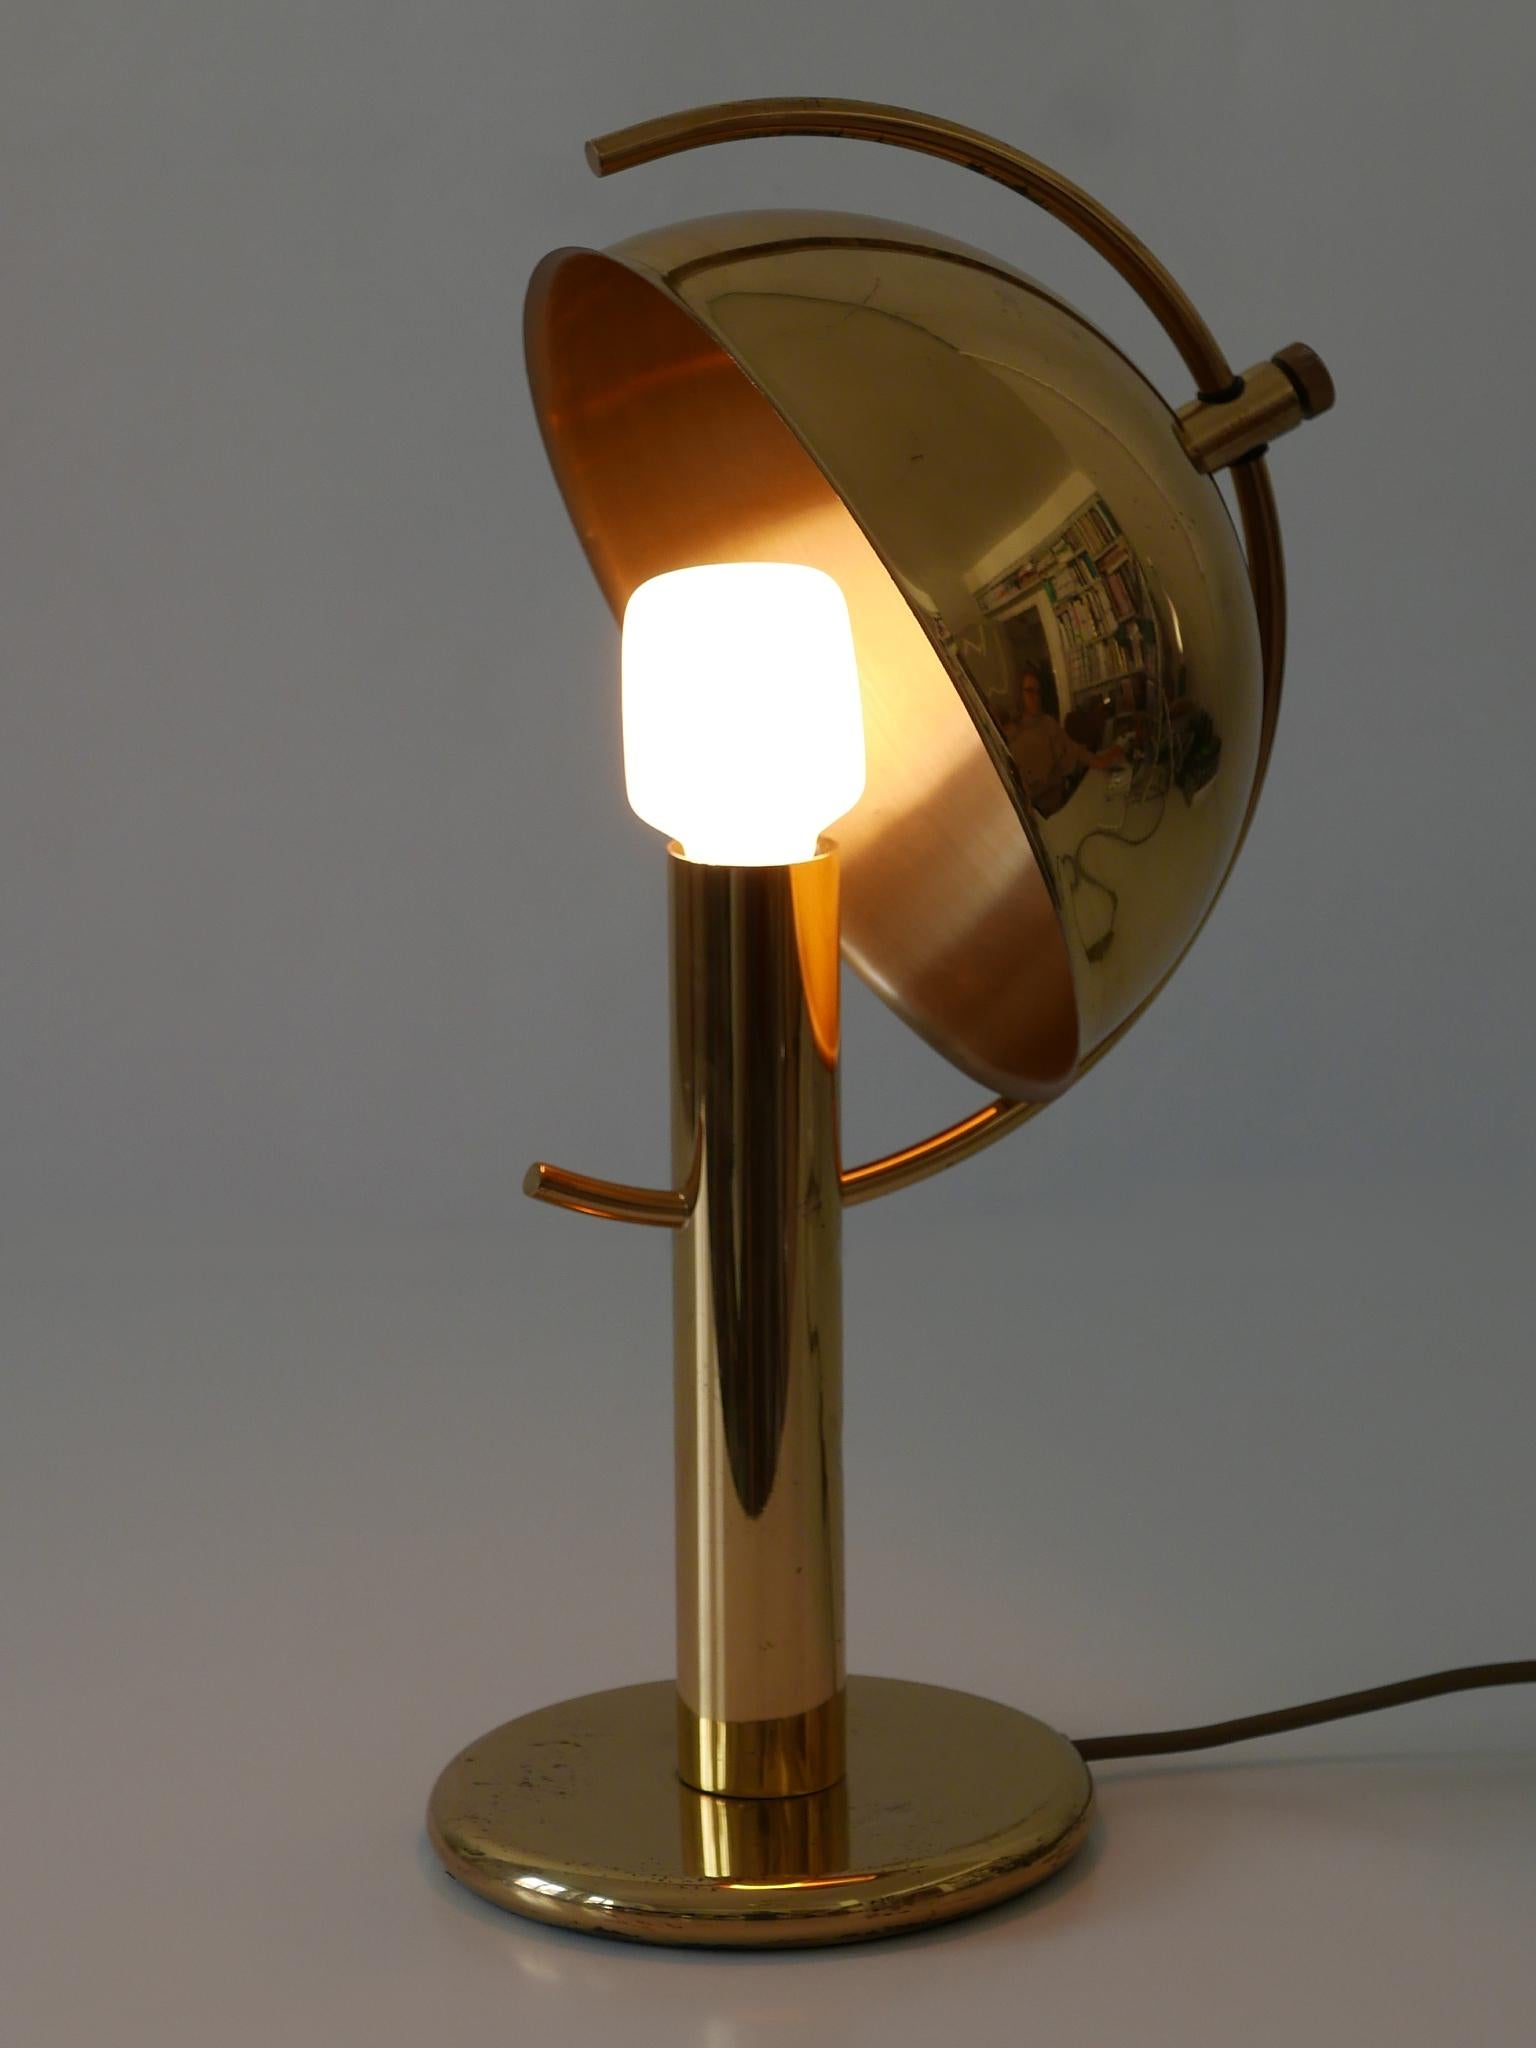 Exceptional and elegant Mid-Century Modern brass table lamp with adjustable lamp shade. Designed and manufactured by Gebrüder Cosack, Germany, 1960s.

Executed in massive brass sheet and tube, the lamp comes with 1 x E27 / E26 Edison screw fit